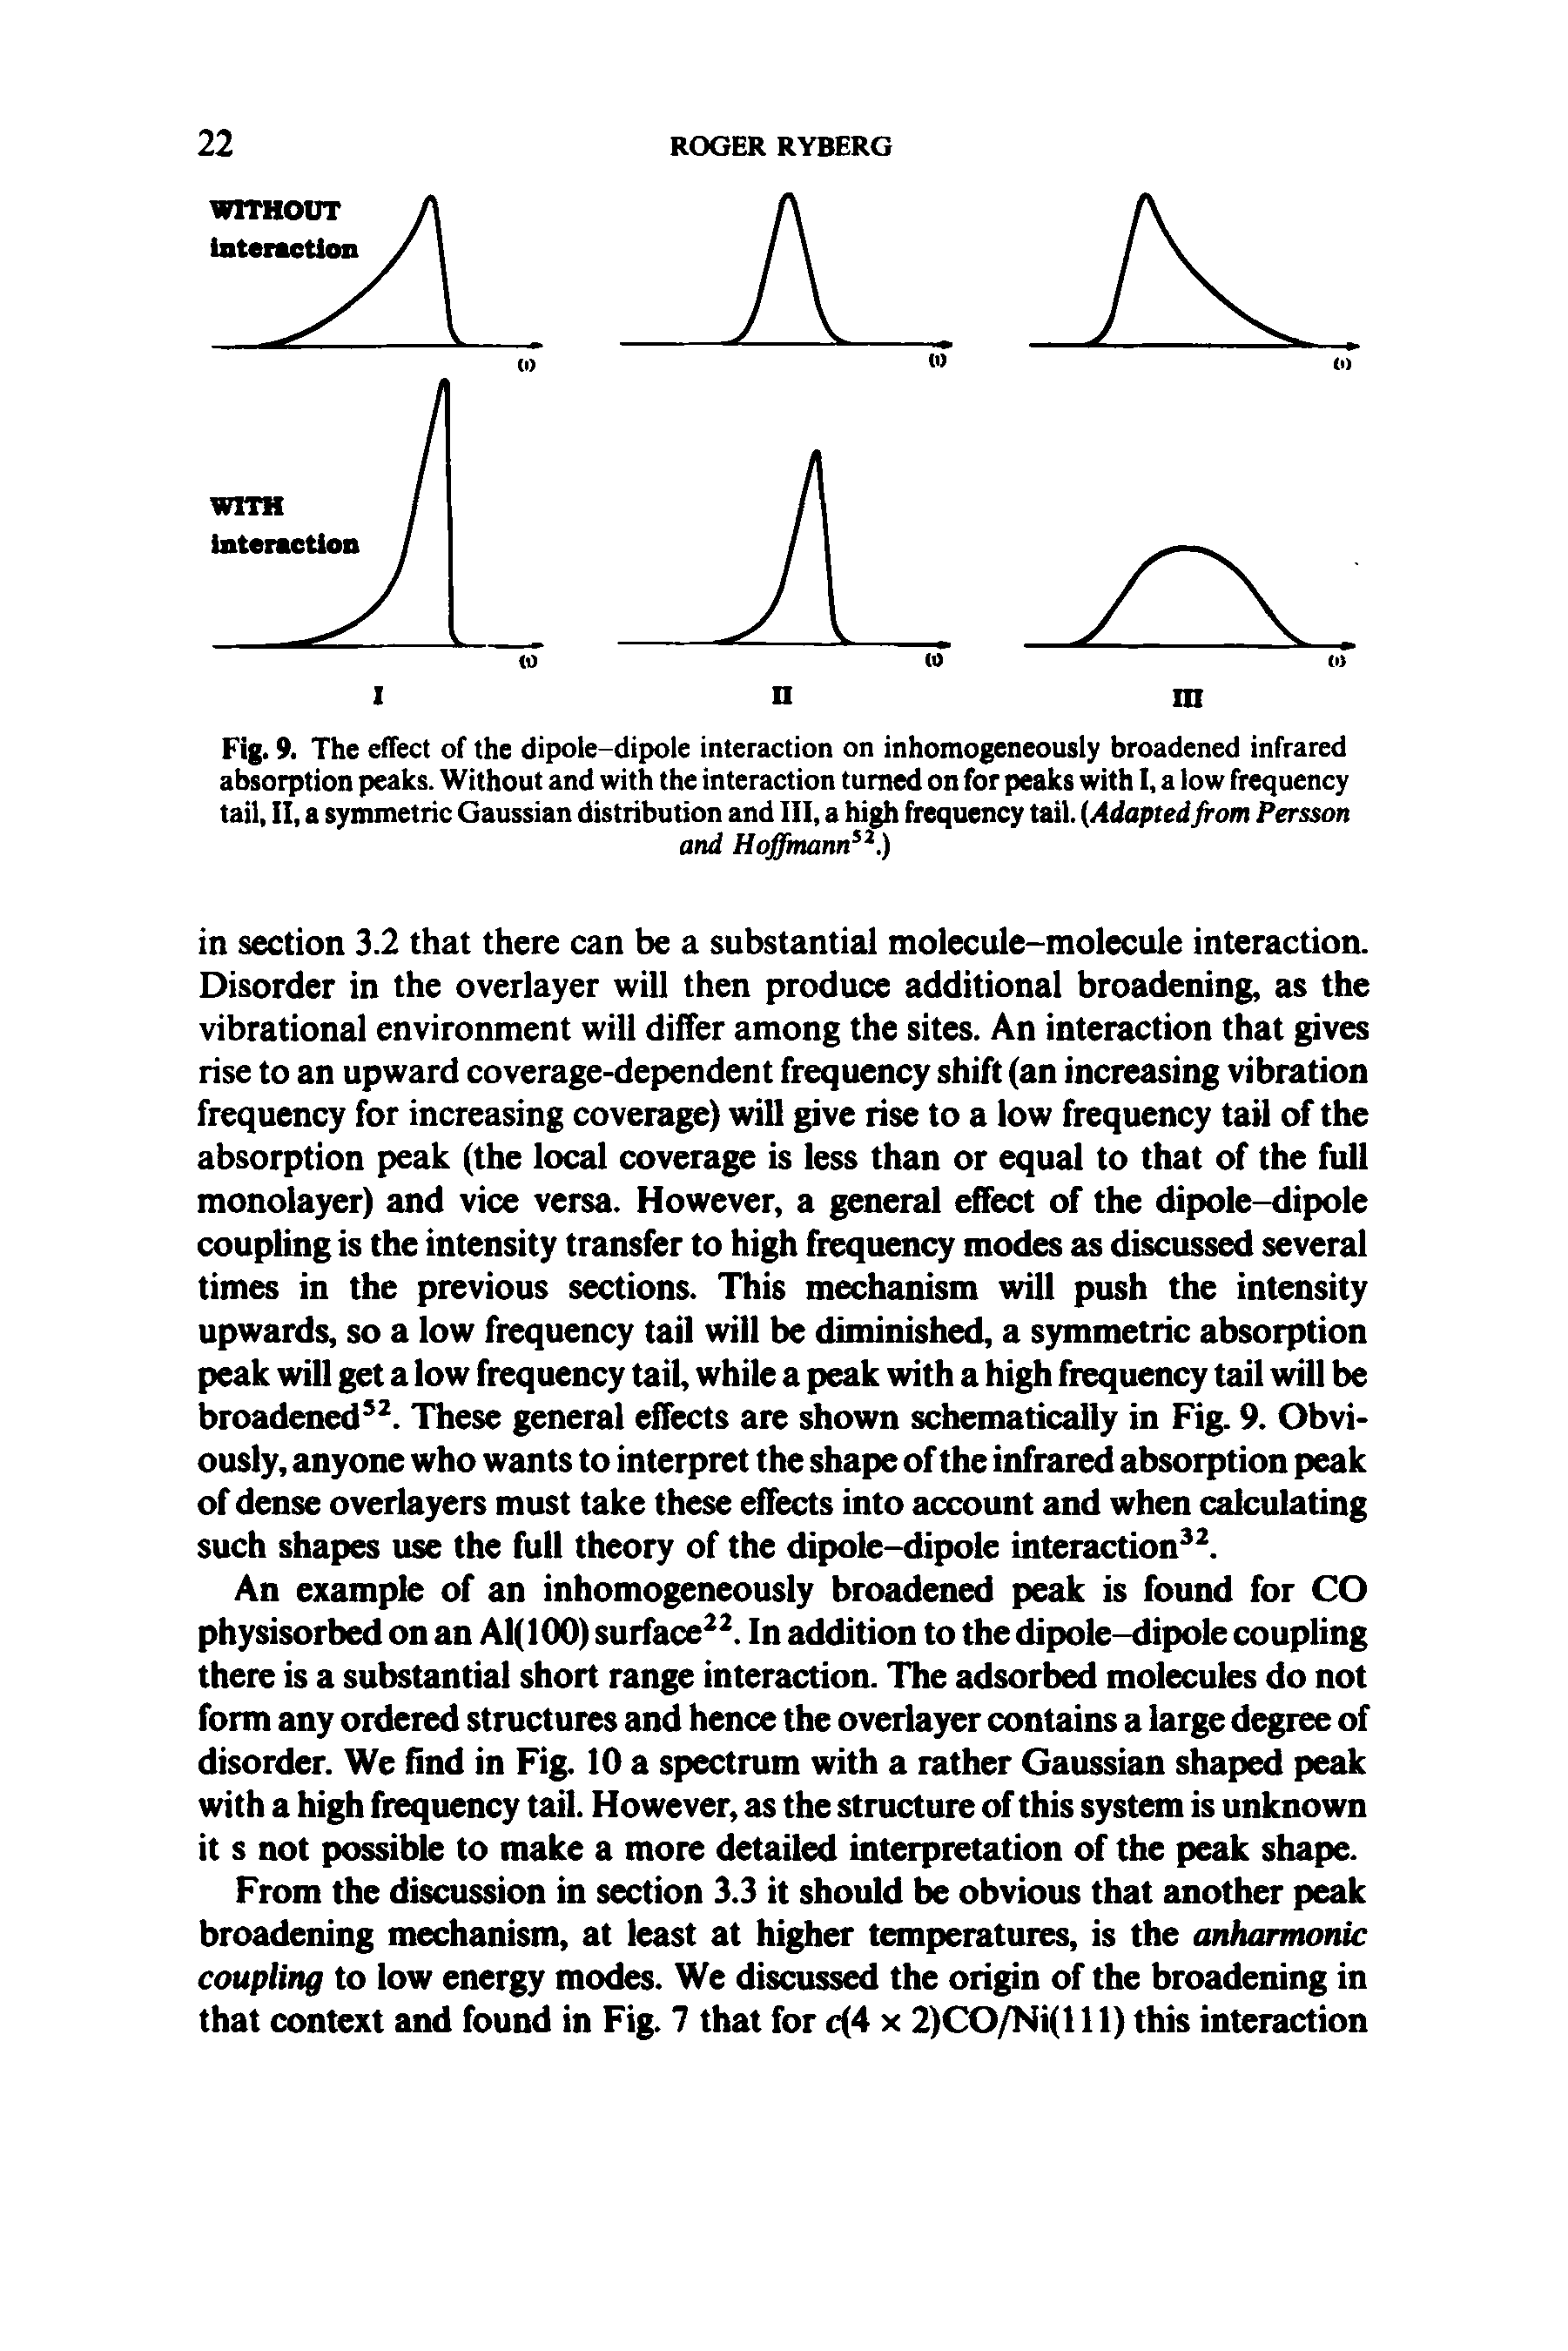 Fig. 9. The efTect of the dipole-dipole interaction on inhomogeneously broadened infrared absorption peaks. Without and with the interaction turned on for peaks with I, a low frequency tail, II, a symmetric Gaussian distribution and III, a high frequency tail. (Adaptedfrom Persson...